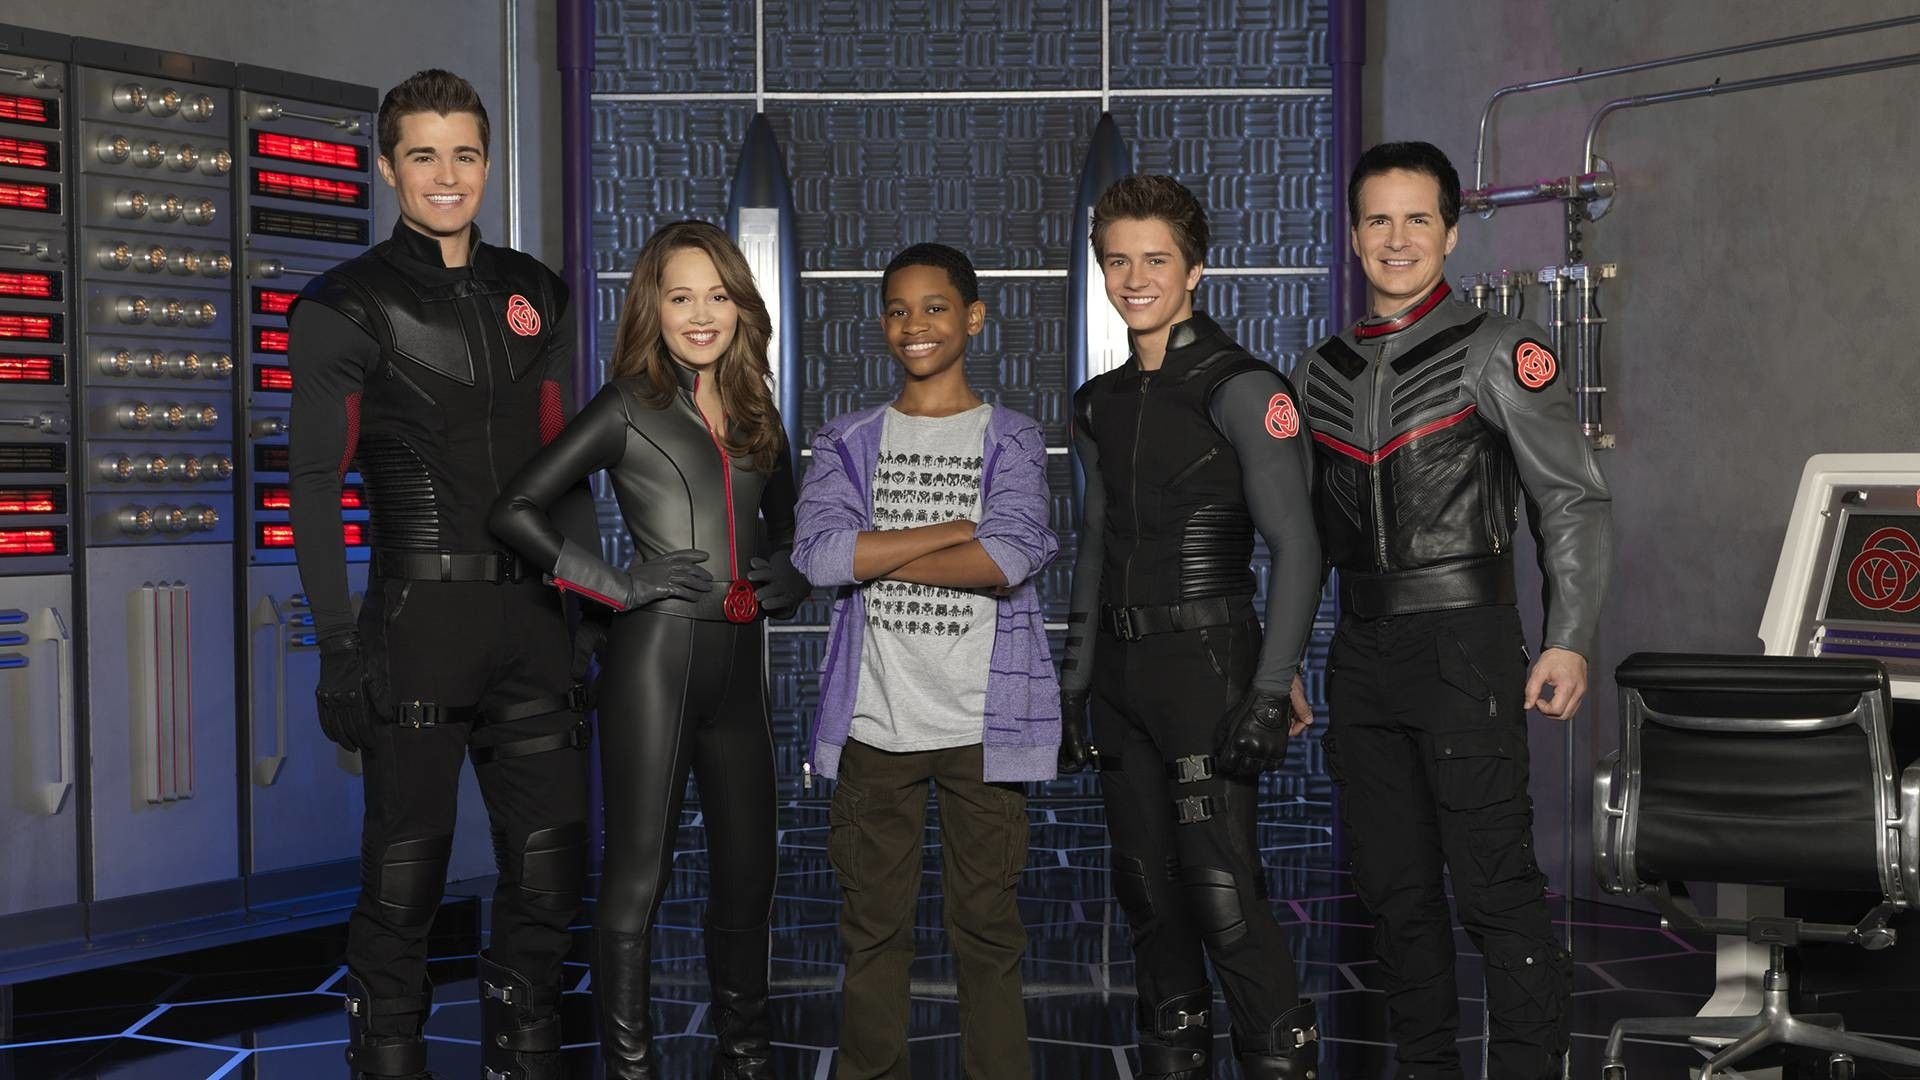 Lab Rats TV show, Bionic siblings, High-tech lab, Action-packed adventures, 1920x1080 Full HD Desktop